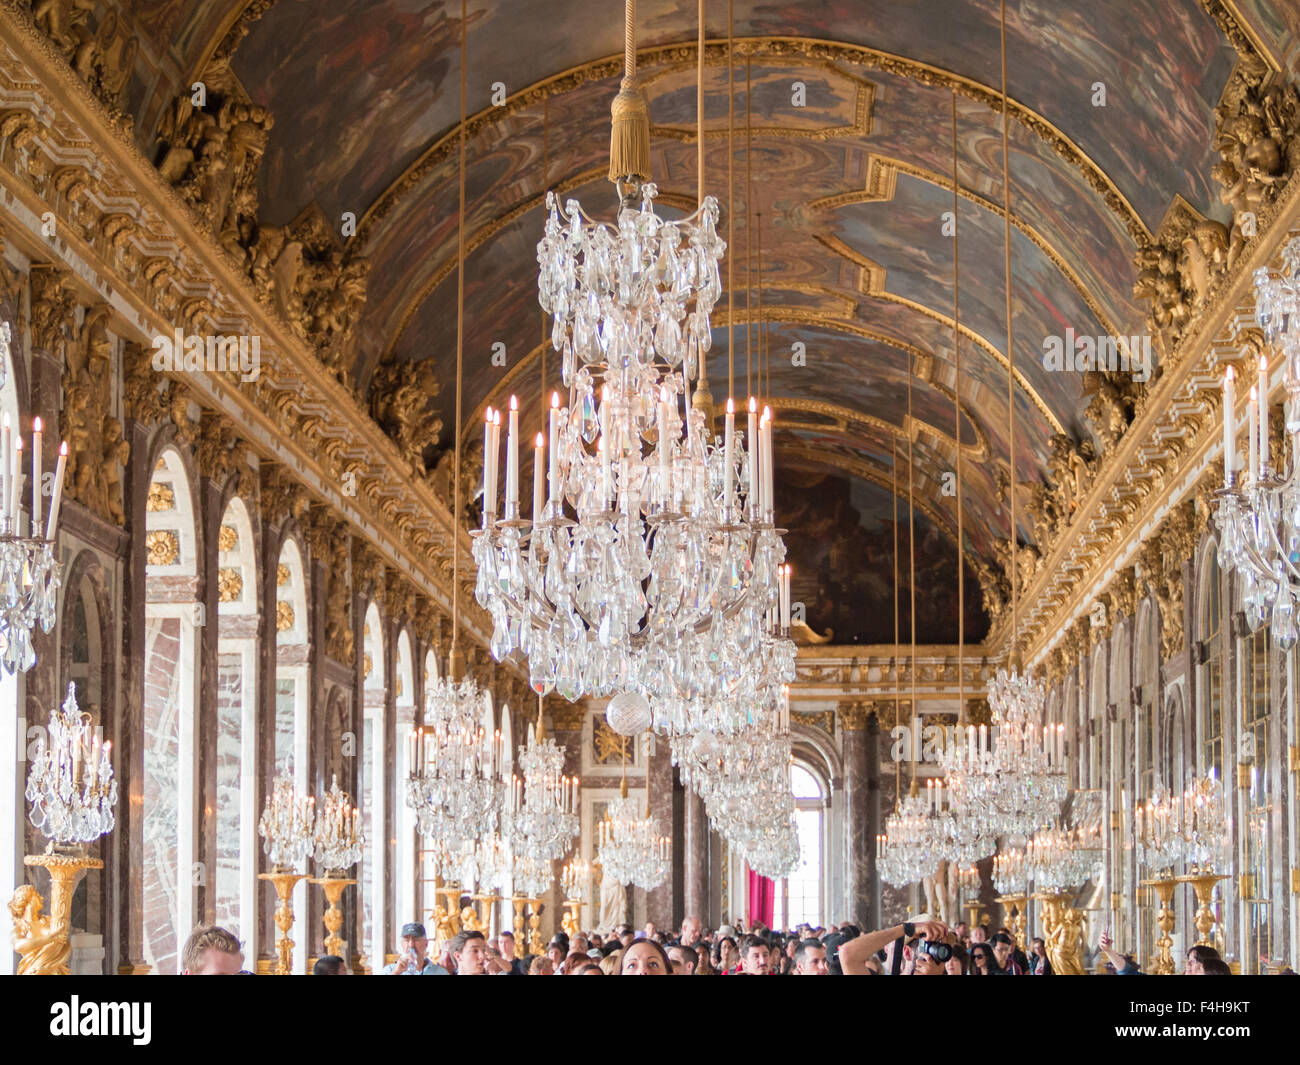 Under the chandeliers of the Versailles Palace Mirror Room Stock Photo